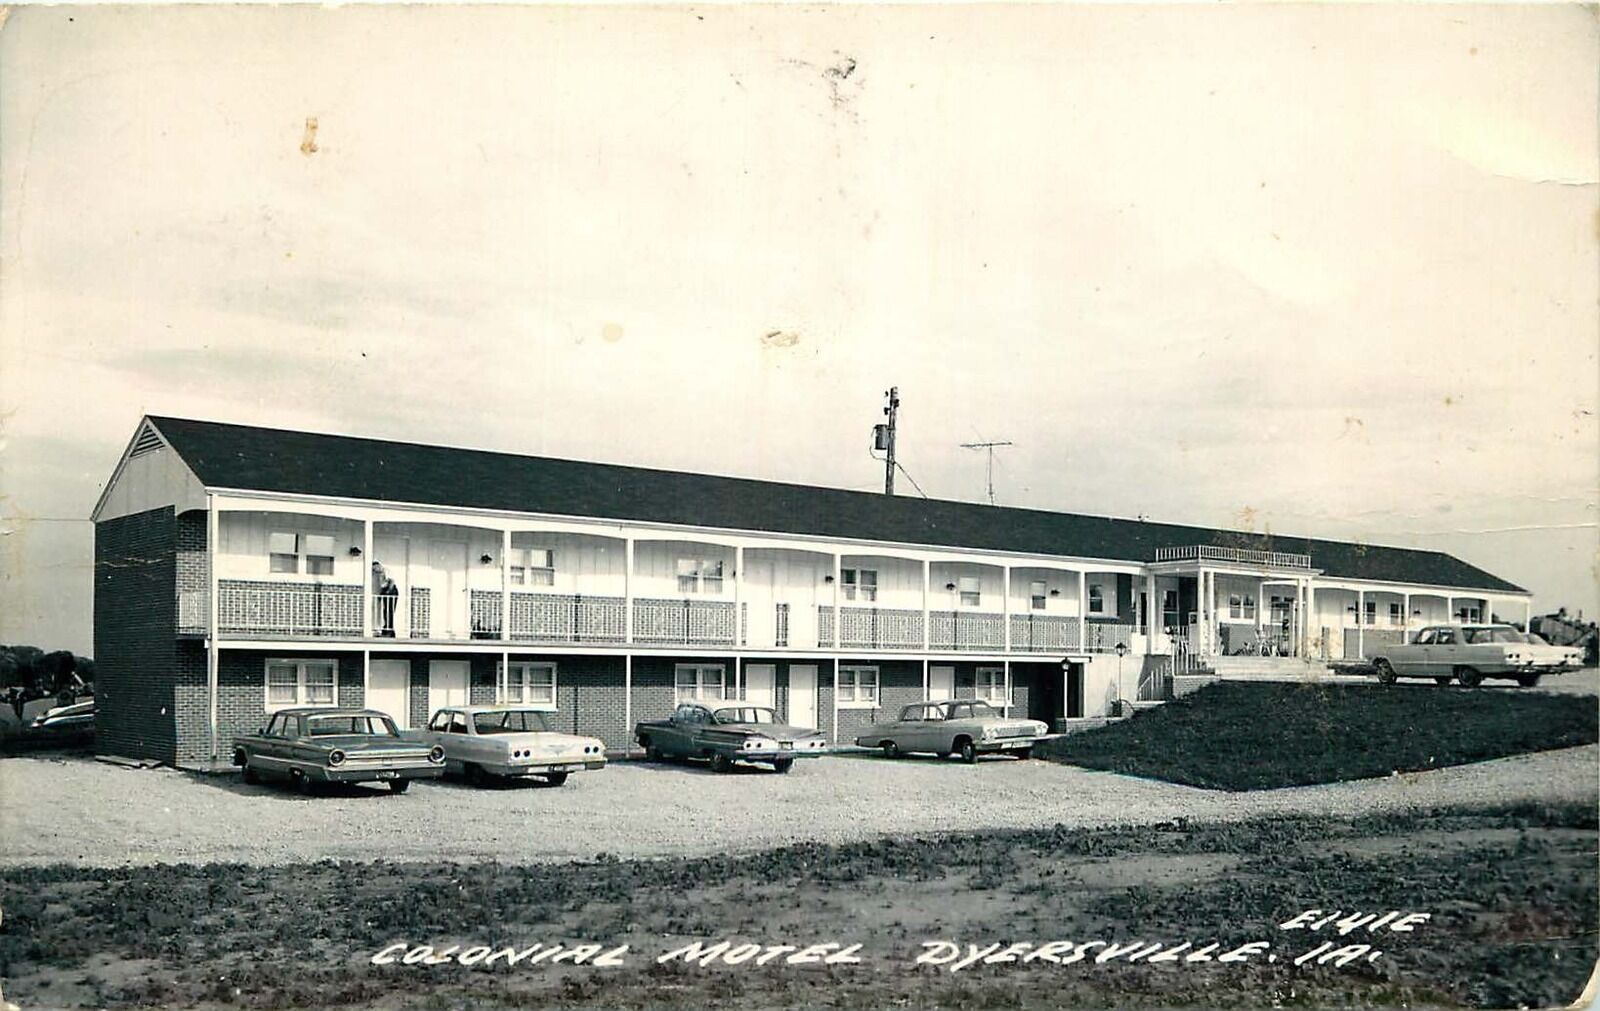 DYERSVILLE IOWA COLONIAL MOTEL REAL PHOTO POSTCARD c1965 OLD CARDS